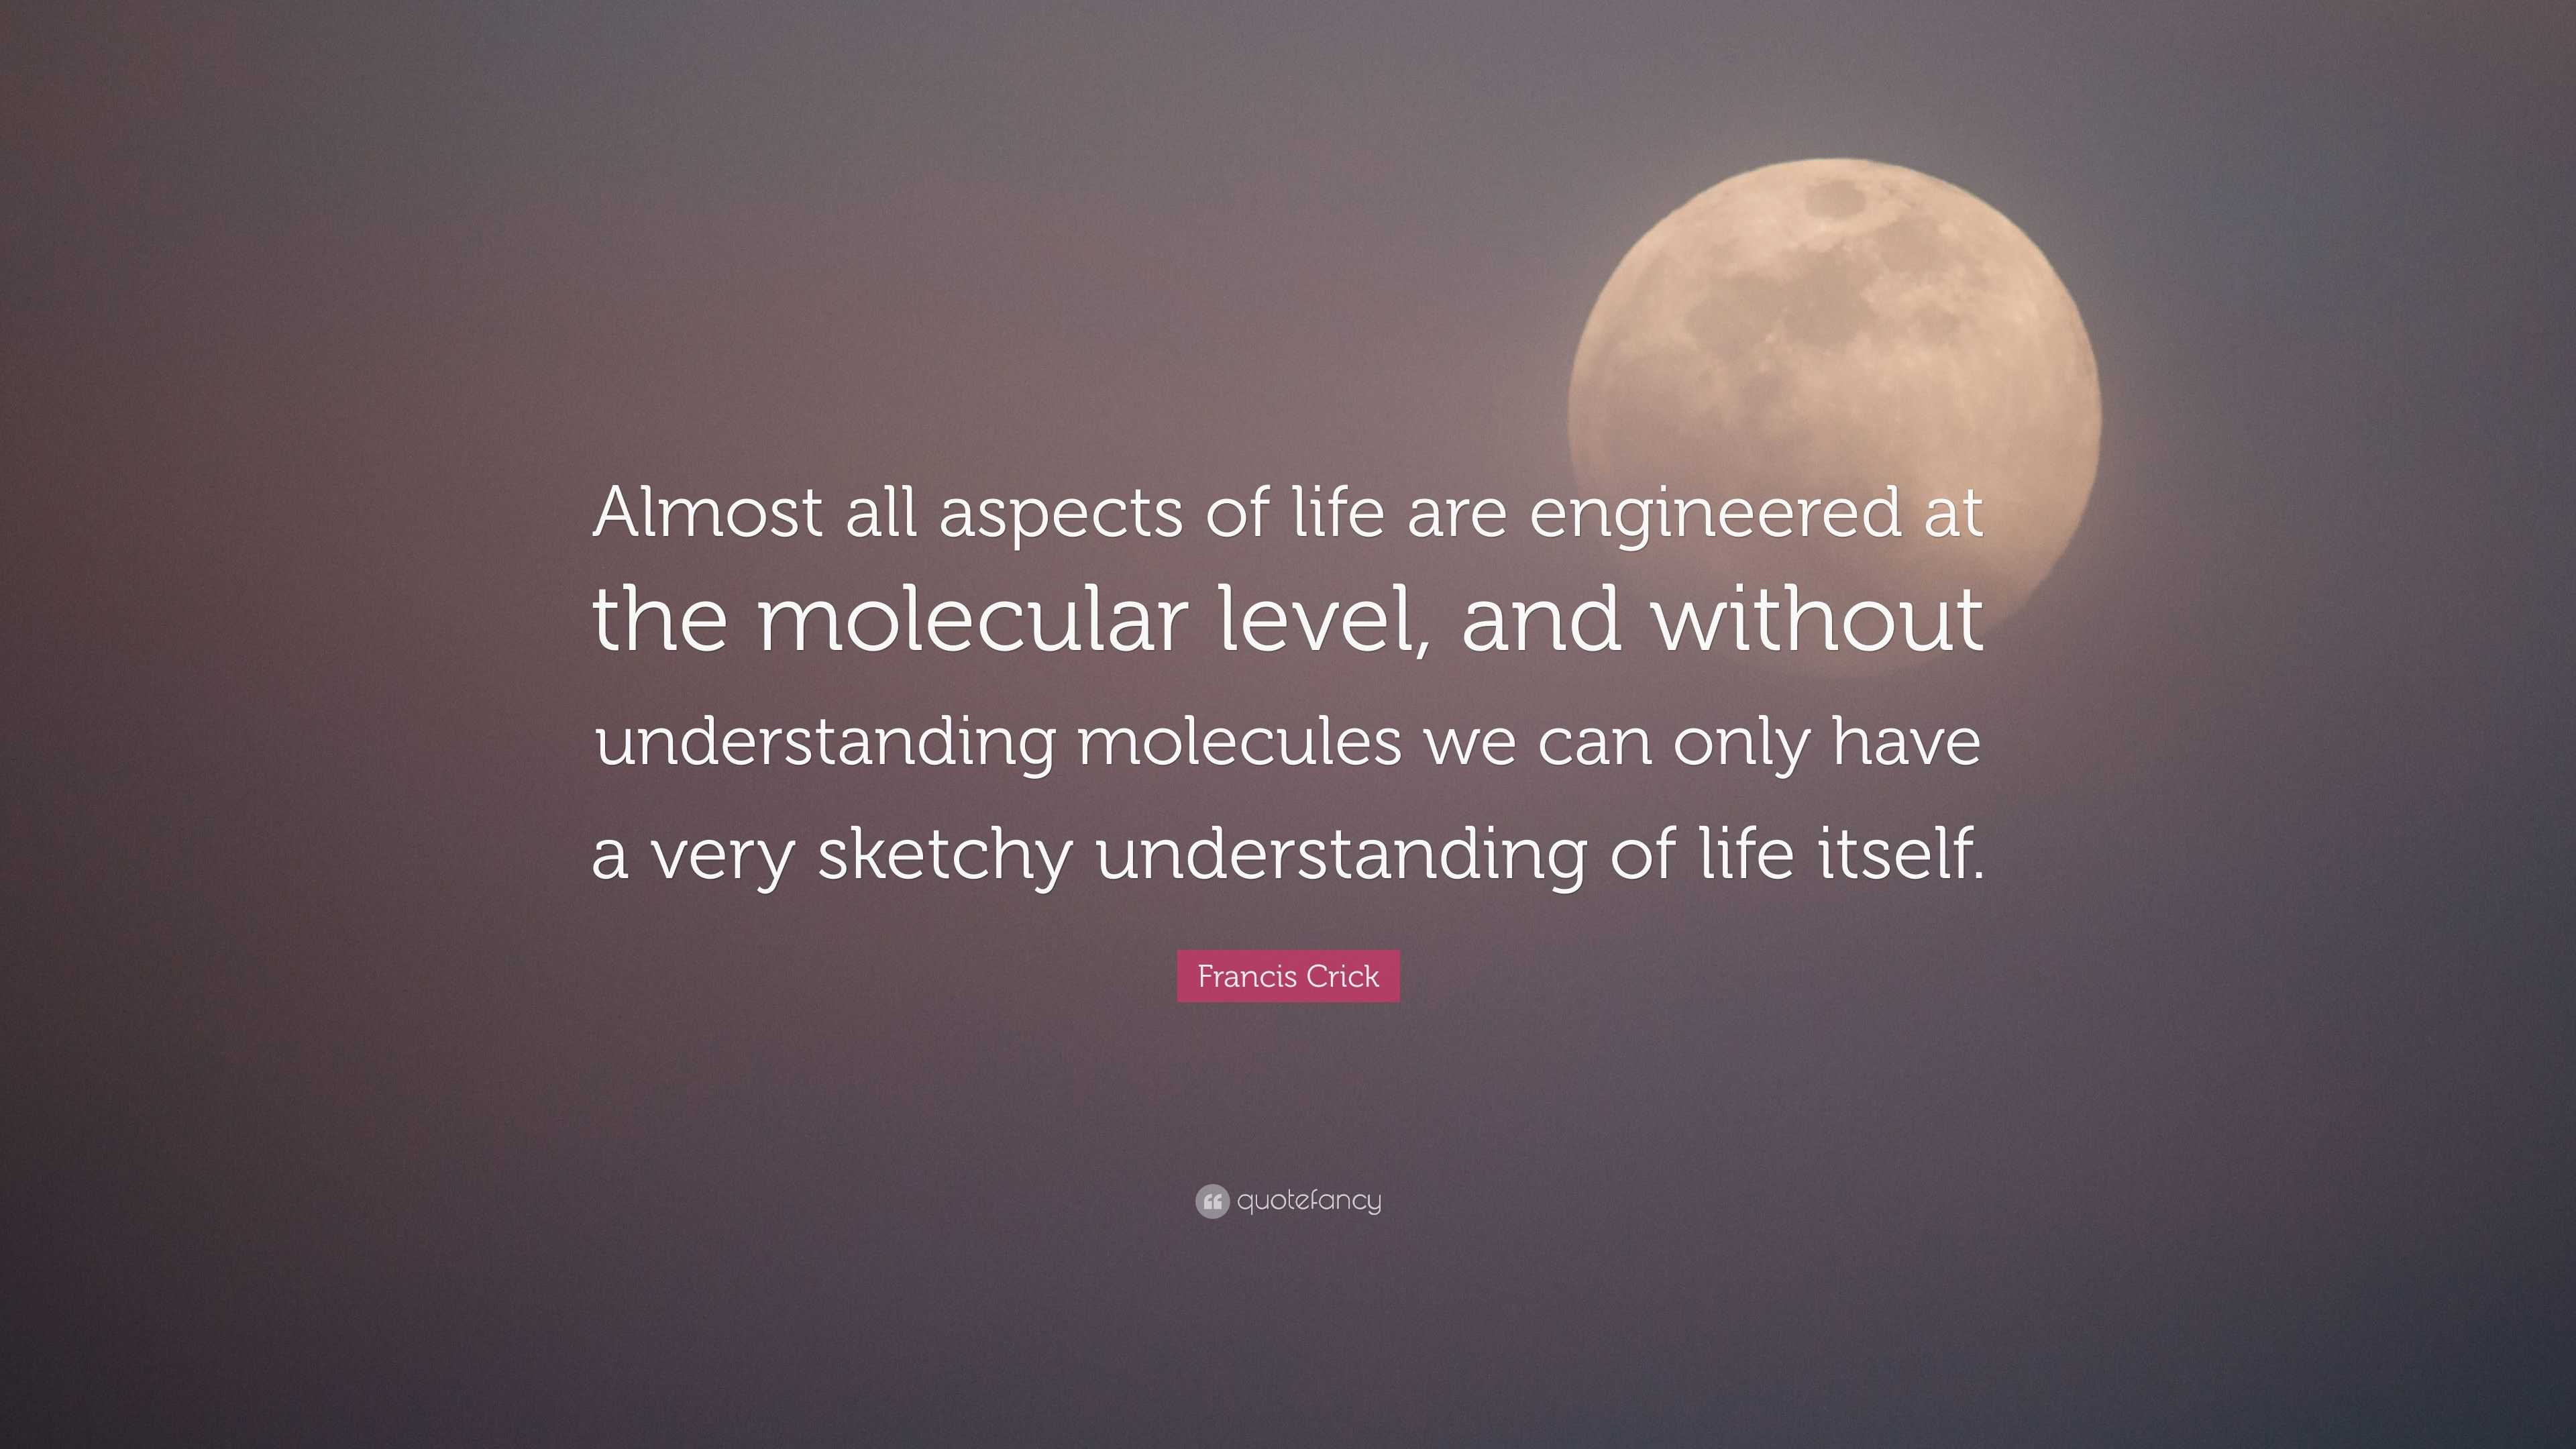 Francis Crick Quote: “Almost all aspects of life are engineered at the  molecular level, and without understanding molecules we can only have a”